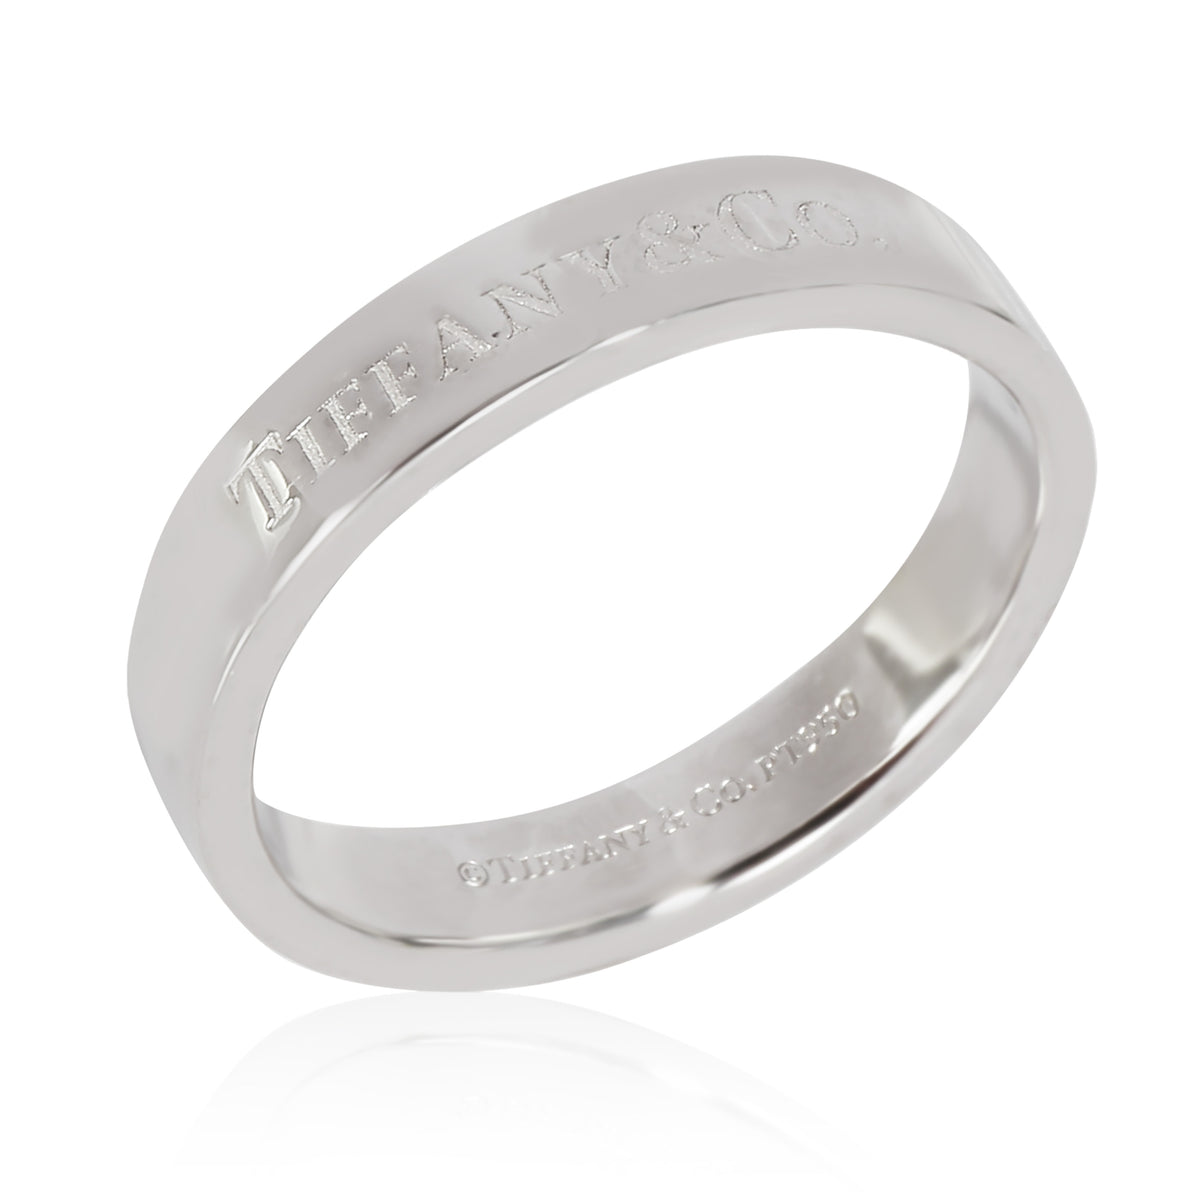 Band Ring in Platinum, 4mm